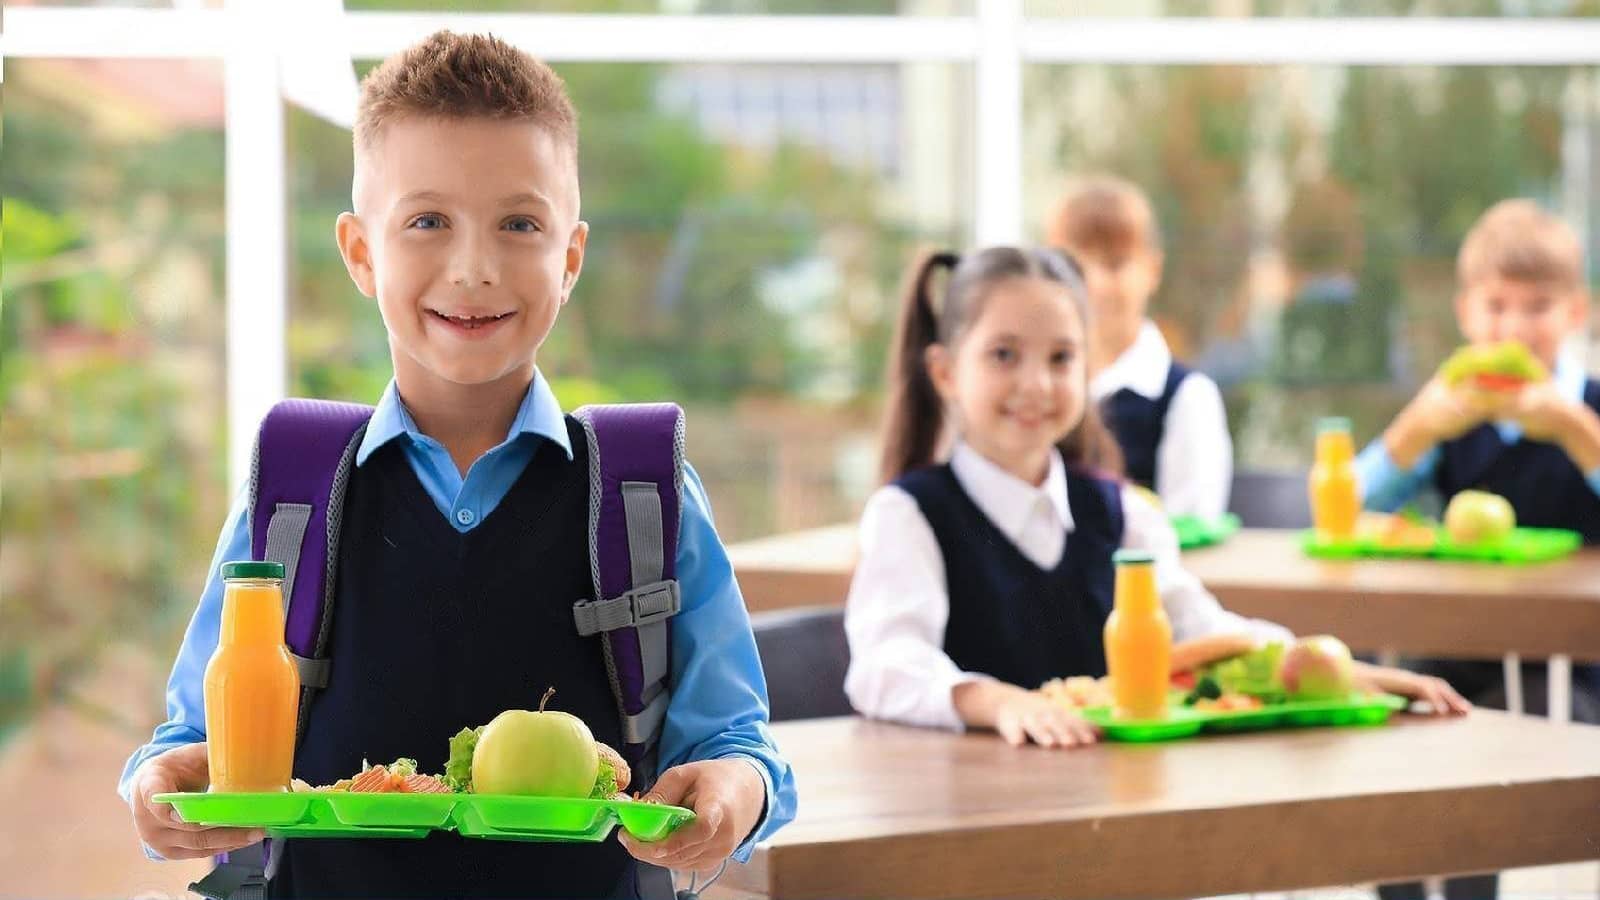 The Importance of Fresh and Nutritious Meals at School